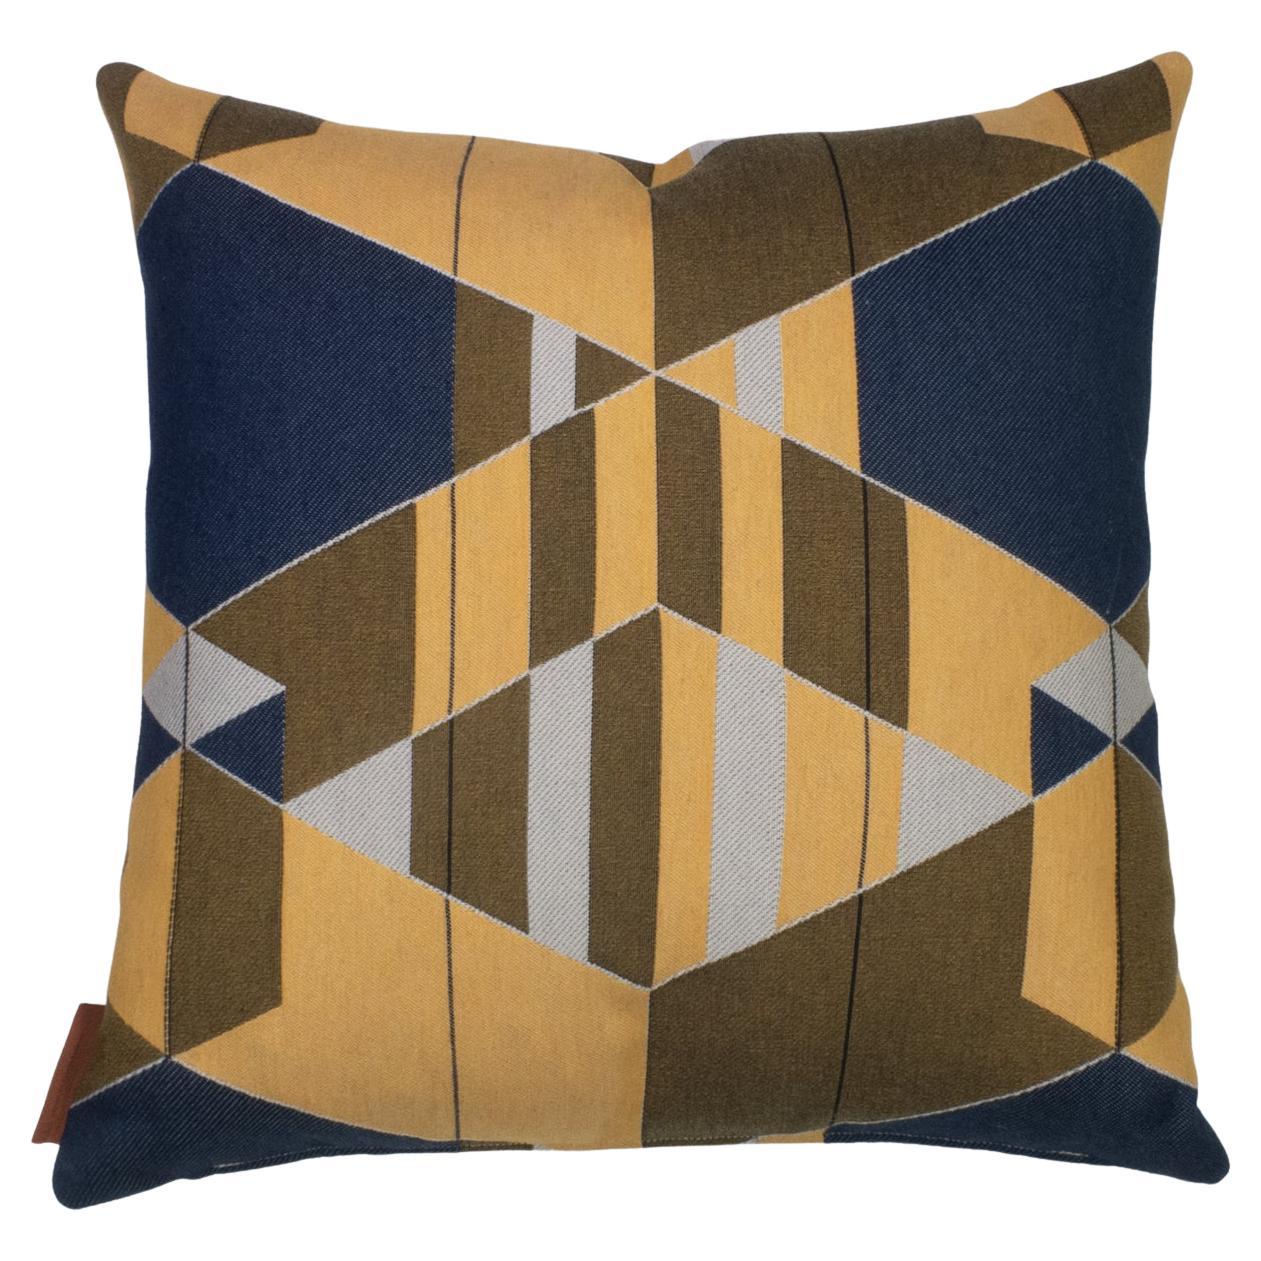 Cushion / Pattern Pillow Absolute Coup De Foudre Blue Yellow by Evolution21 For Sale